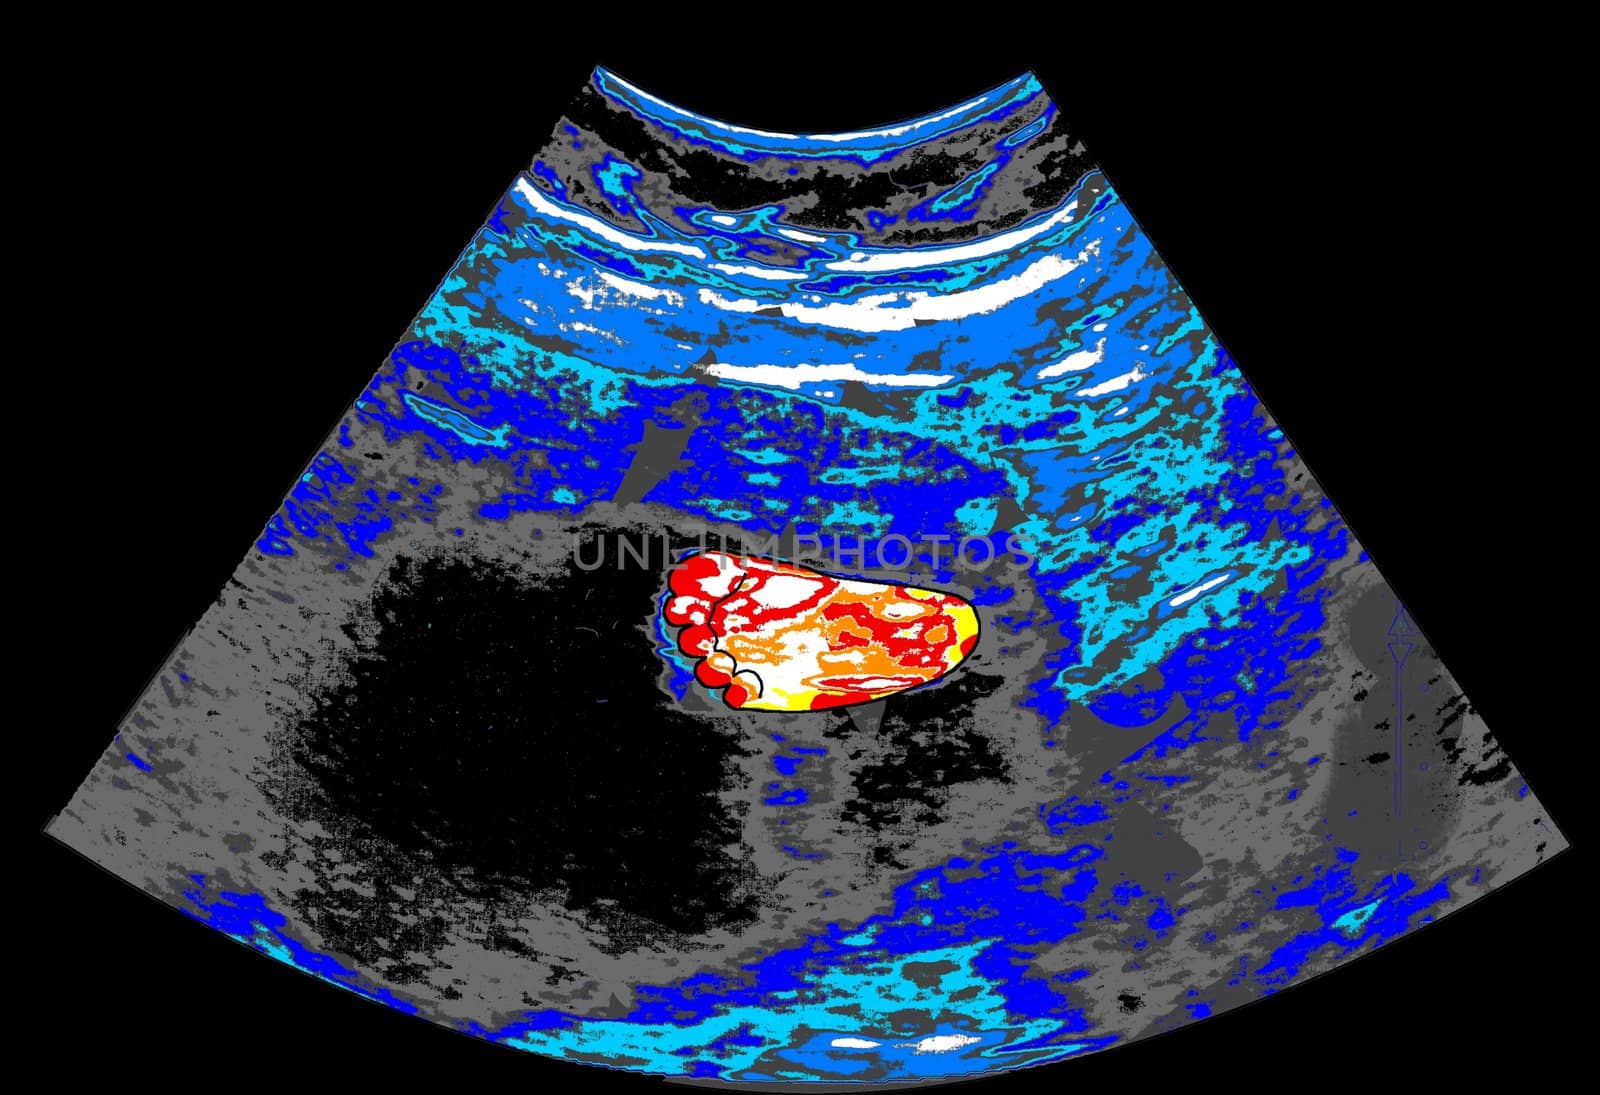 Painted ultrasound with a baby's foot - a raster illustration.